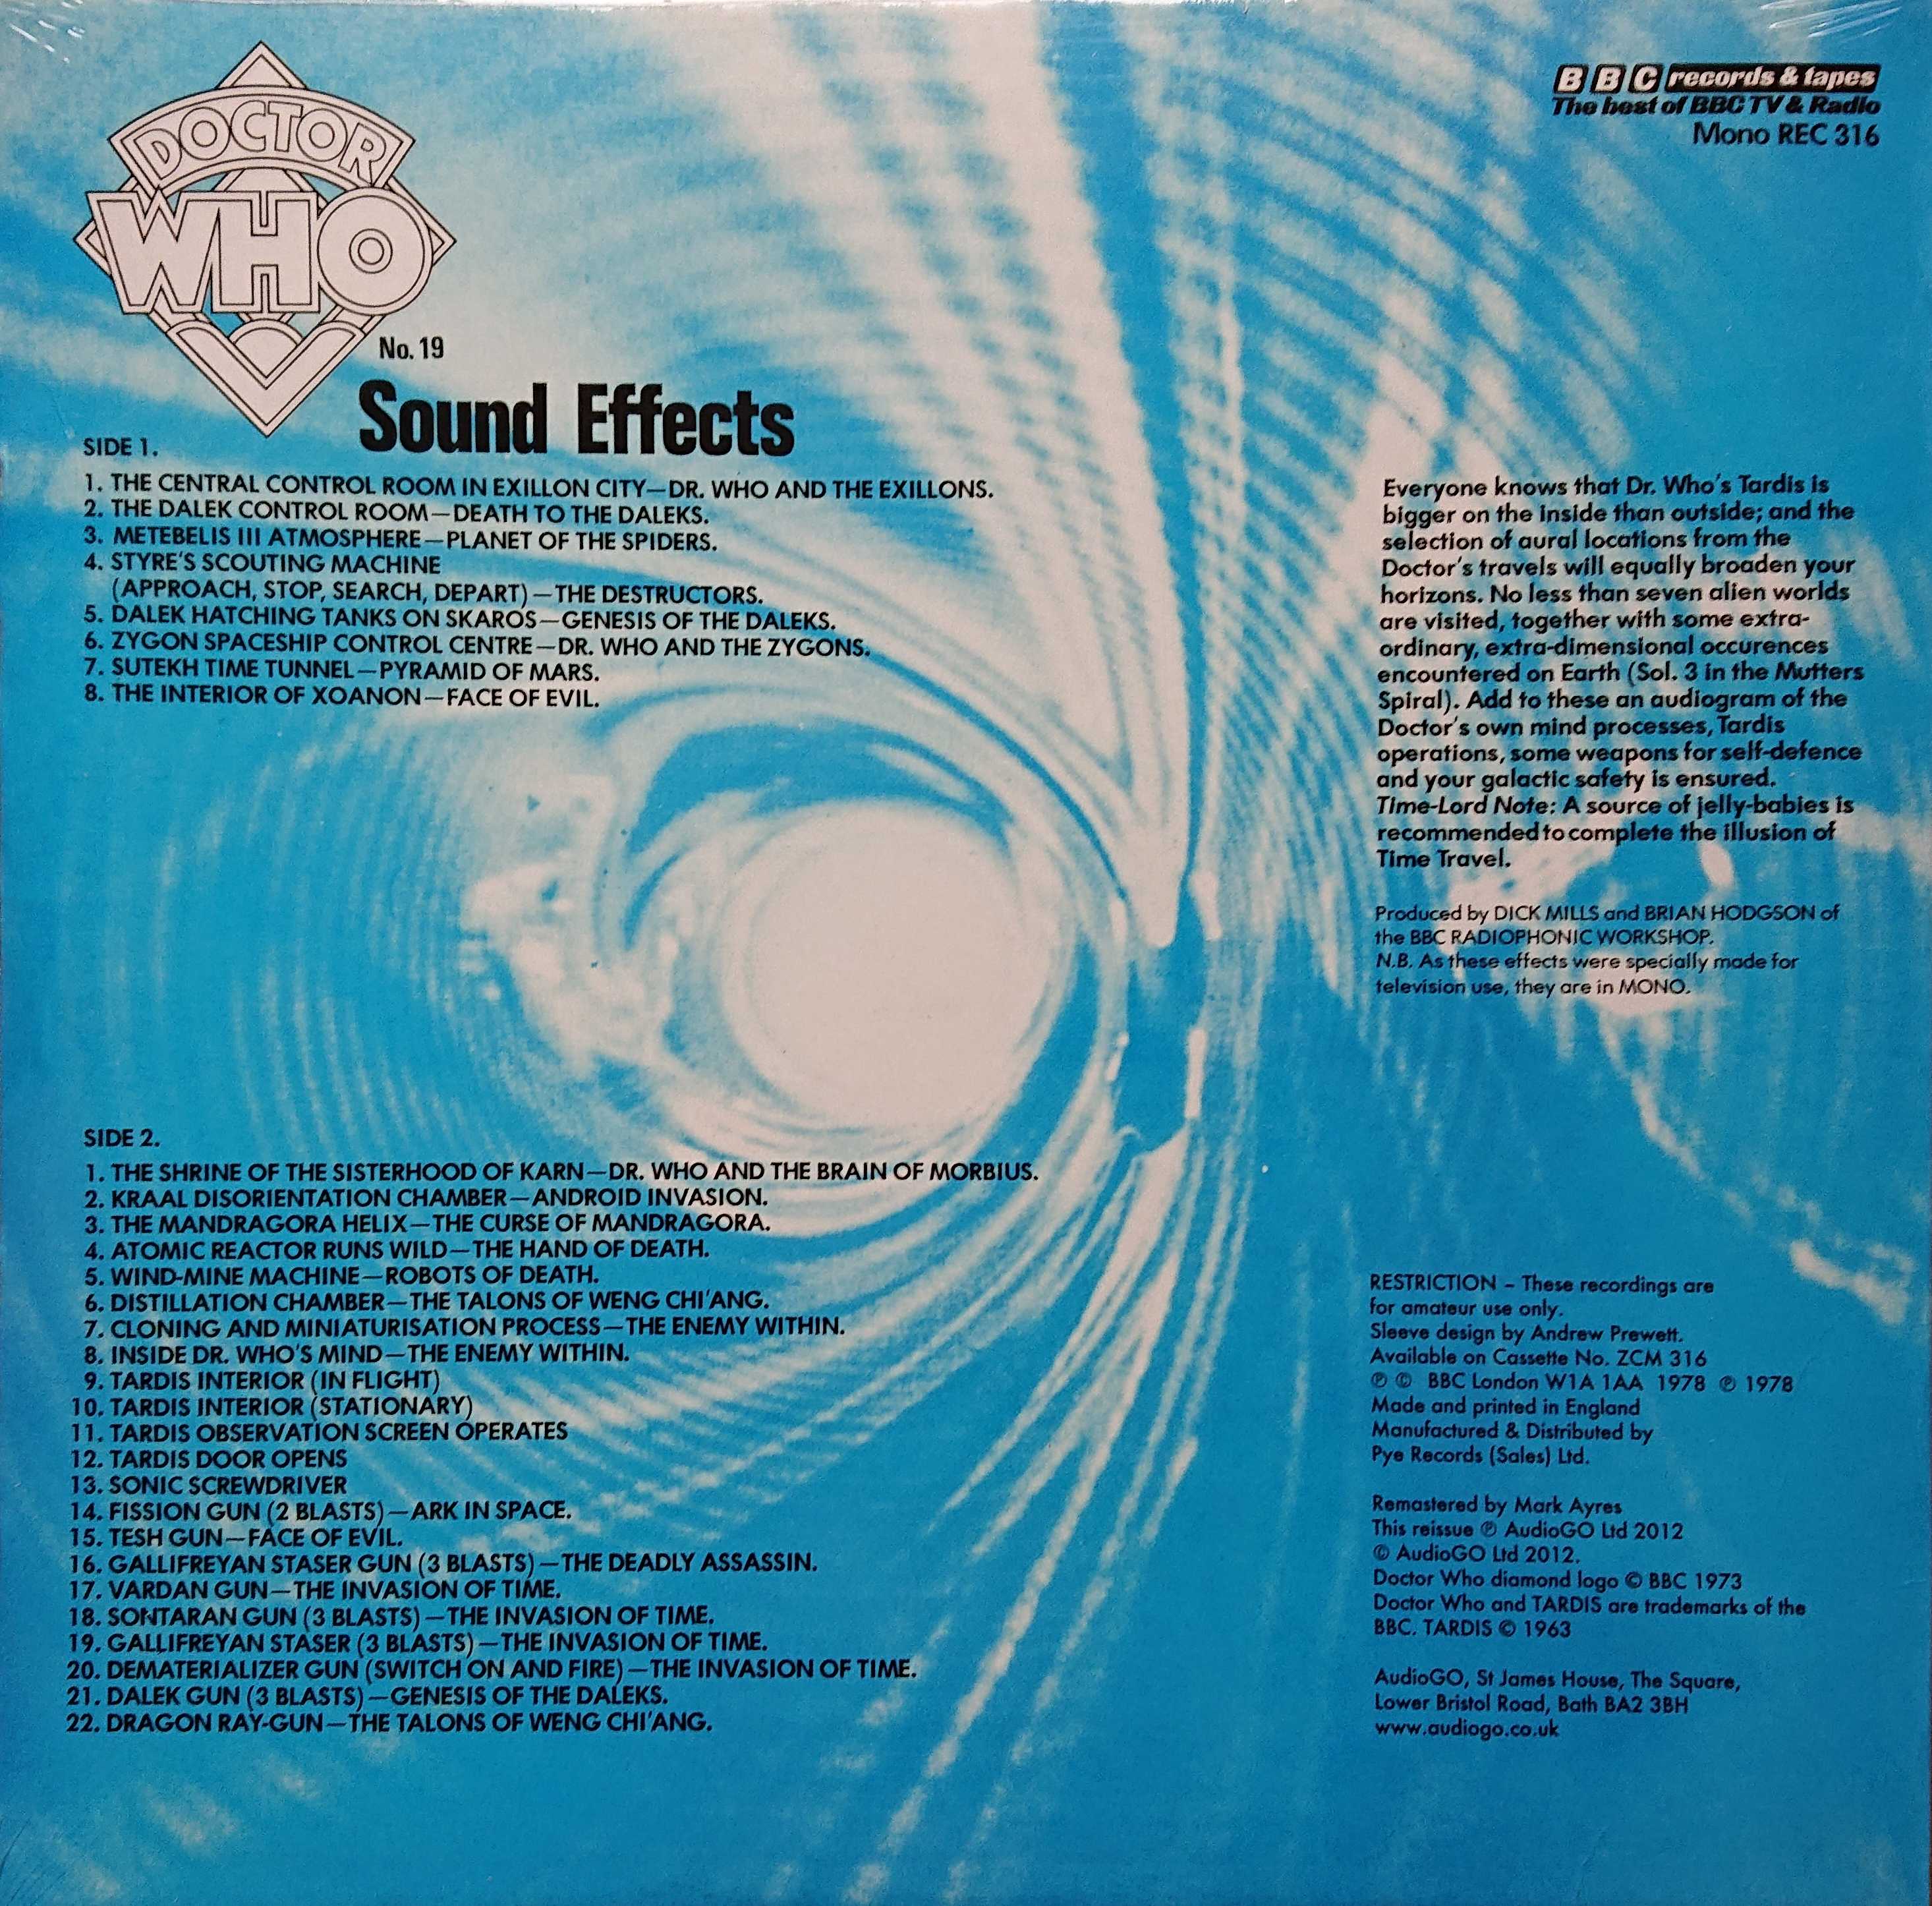 Picture of LP BBC 24819 Doctor Who sound effects - Record Store Day 2012 by artist BBC radiophonic workshop from the BBC records and Tapes library